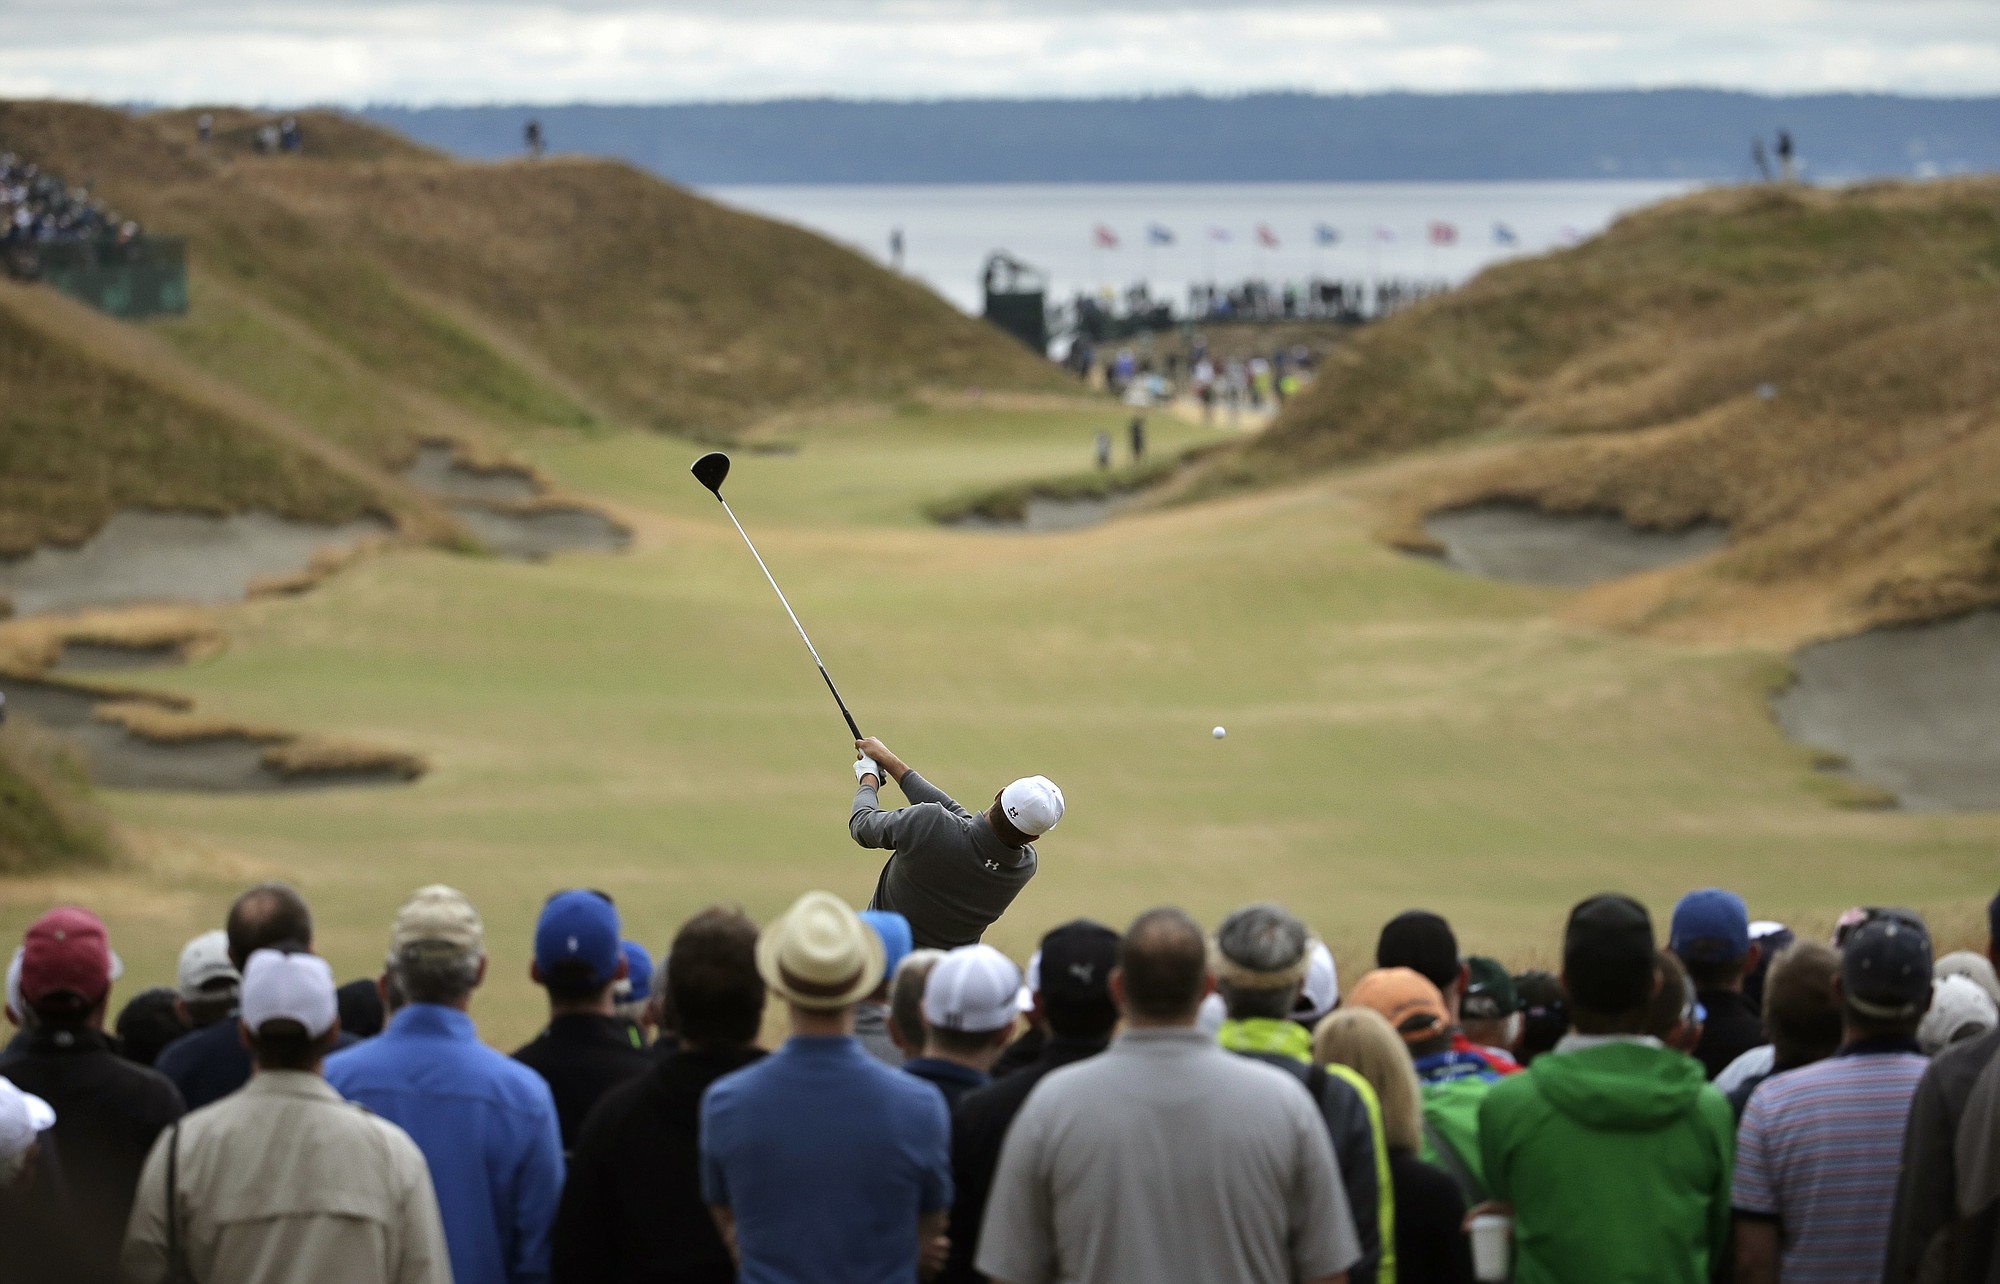 Jordan Spieth watches his tee shot on the 10th hole during the second round at Chambers Bay on Friday.